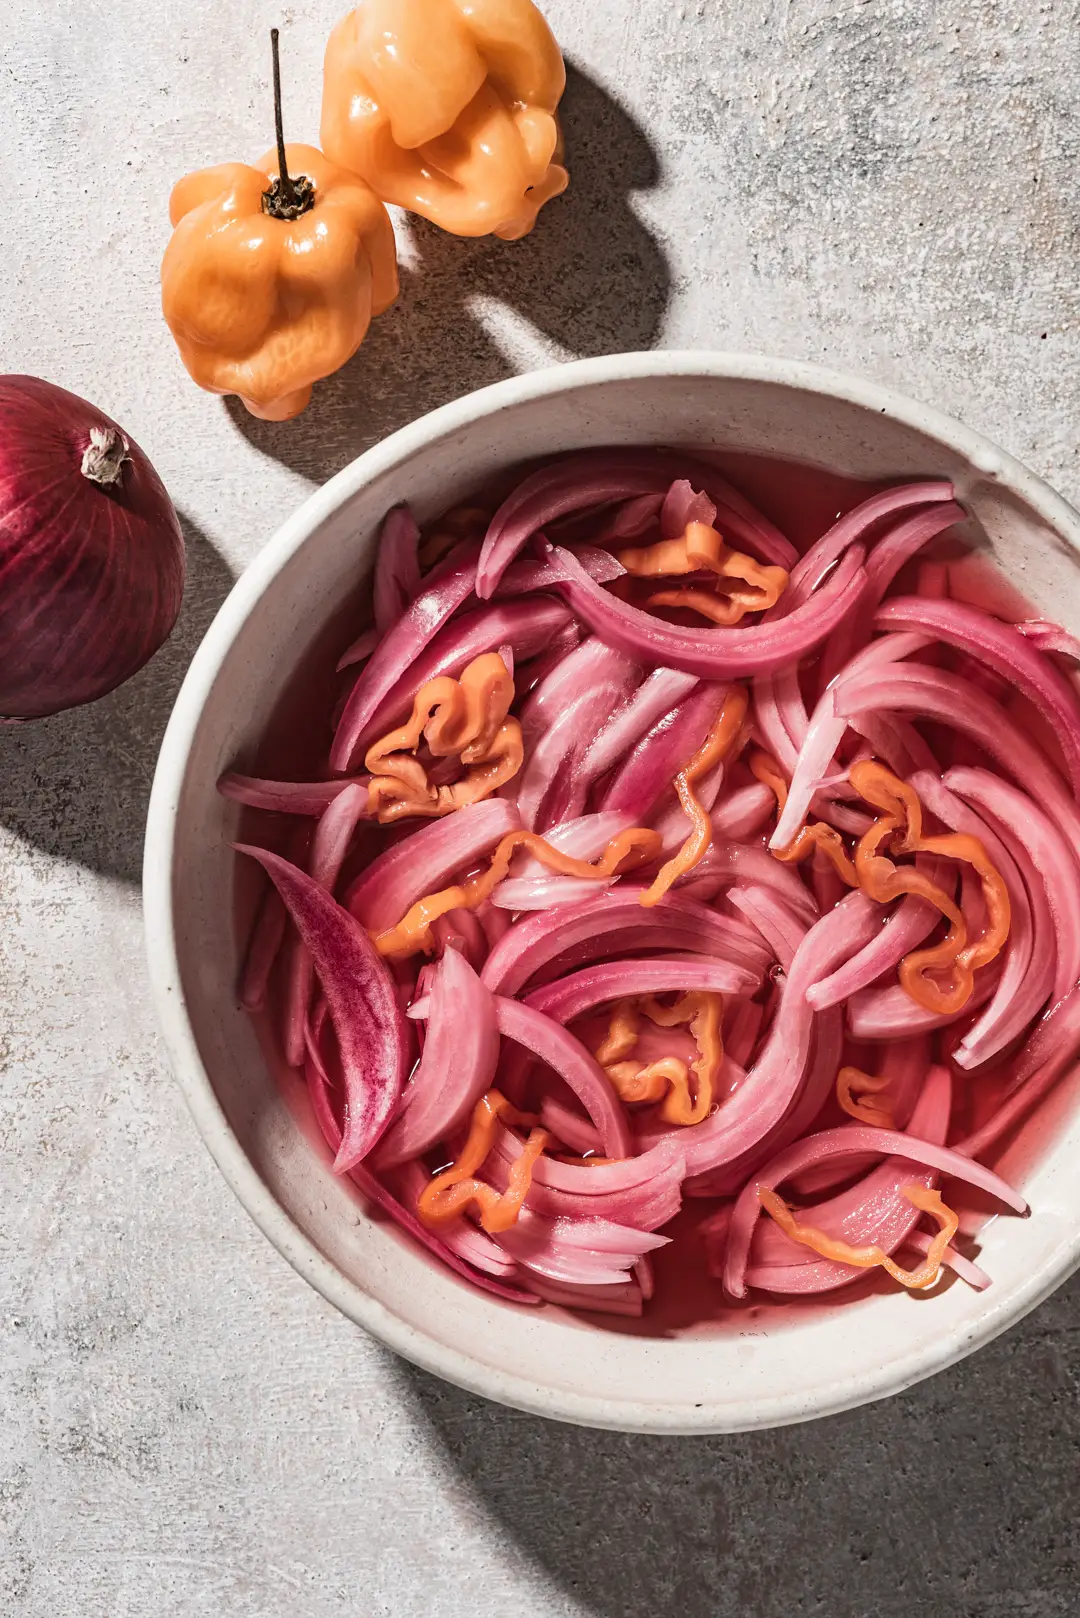 PICKLED RED ONIONS WITH HABANERO PEPPERS